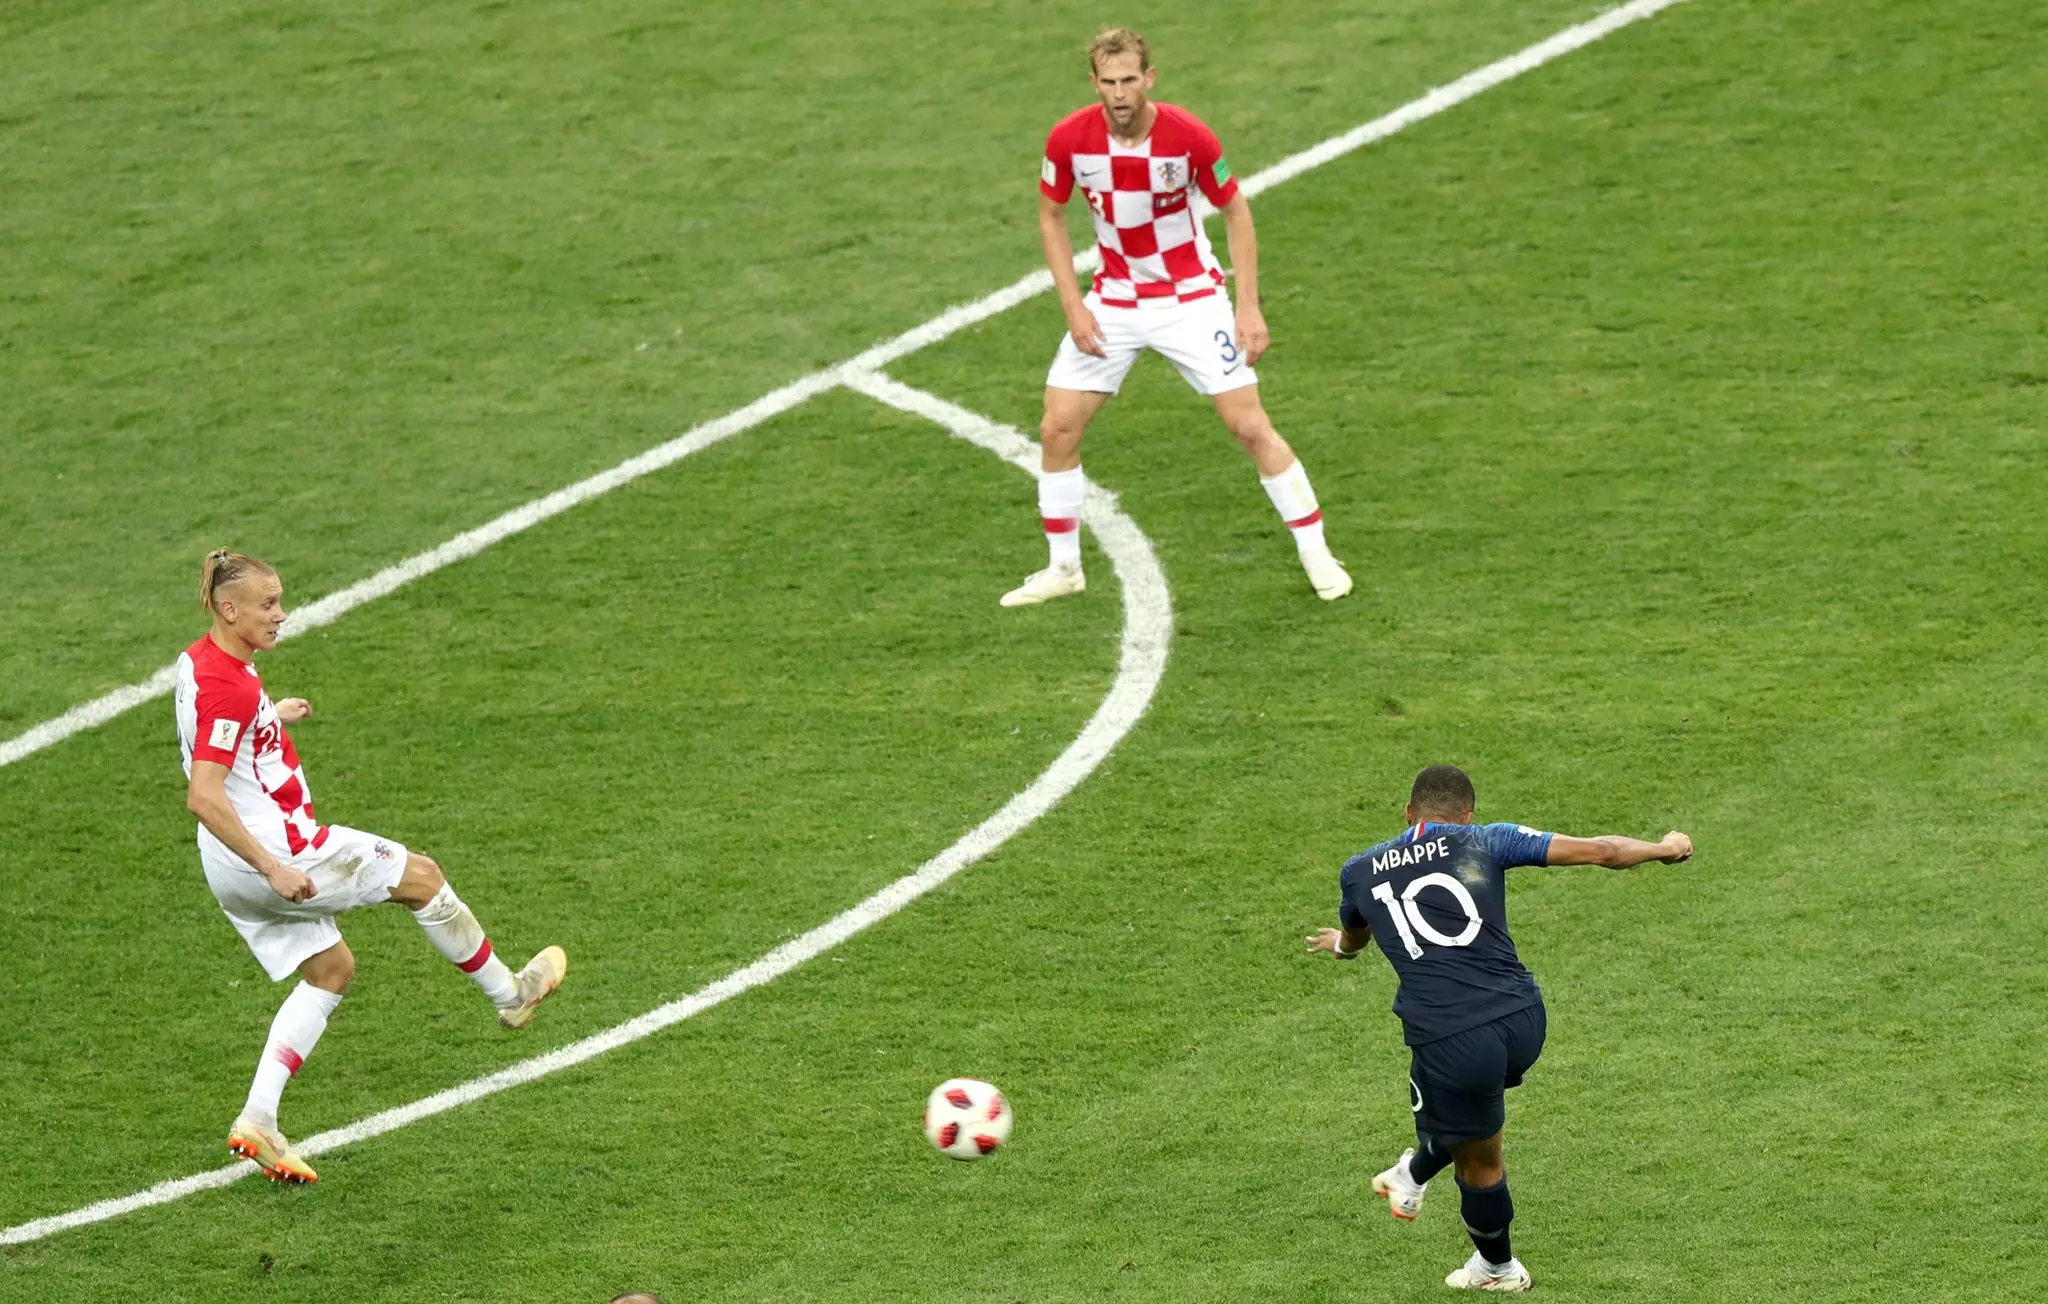 Mbappe sweeps home his goal. Image: PA Images